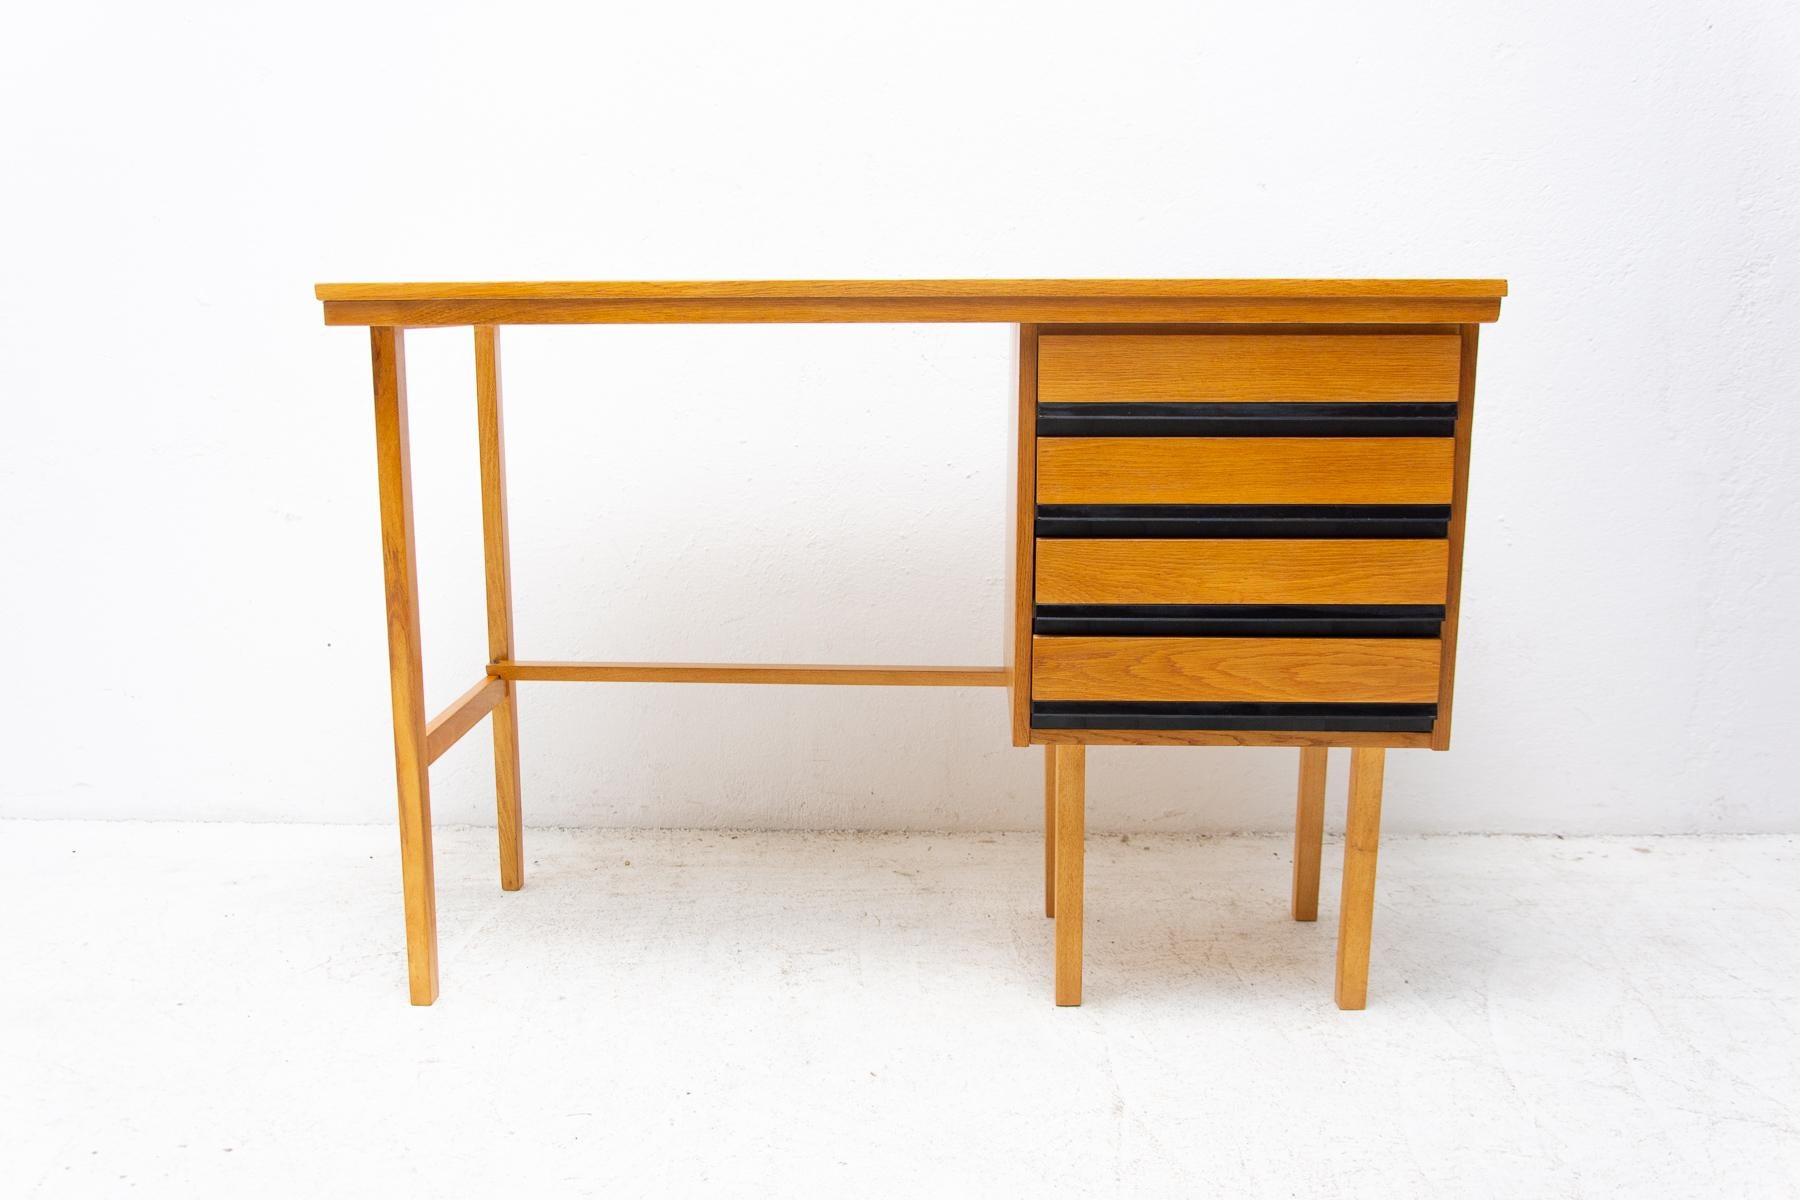 Mid century beech wood writing desk, 1960´s, Czechoslovakia
The design is very simple and elegant. It features a section with 4 plastic drawers. The surface of this desk has been fully restored and is in very good condition.